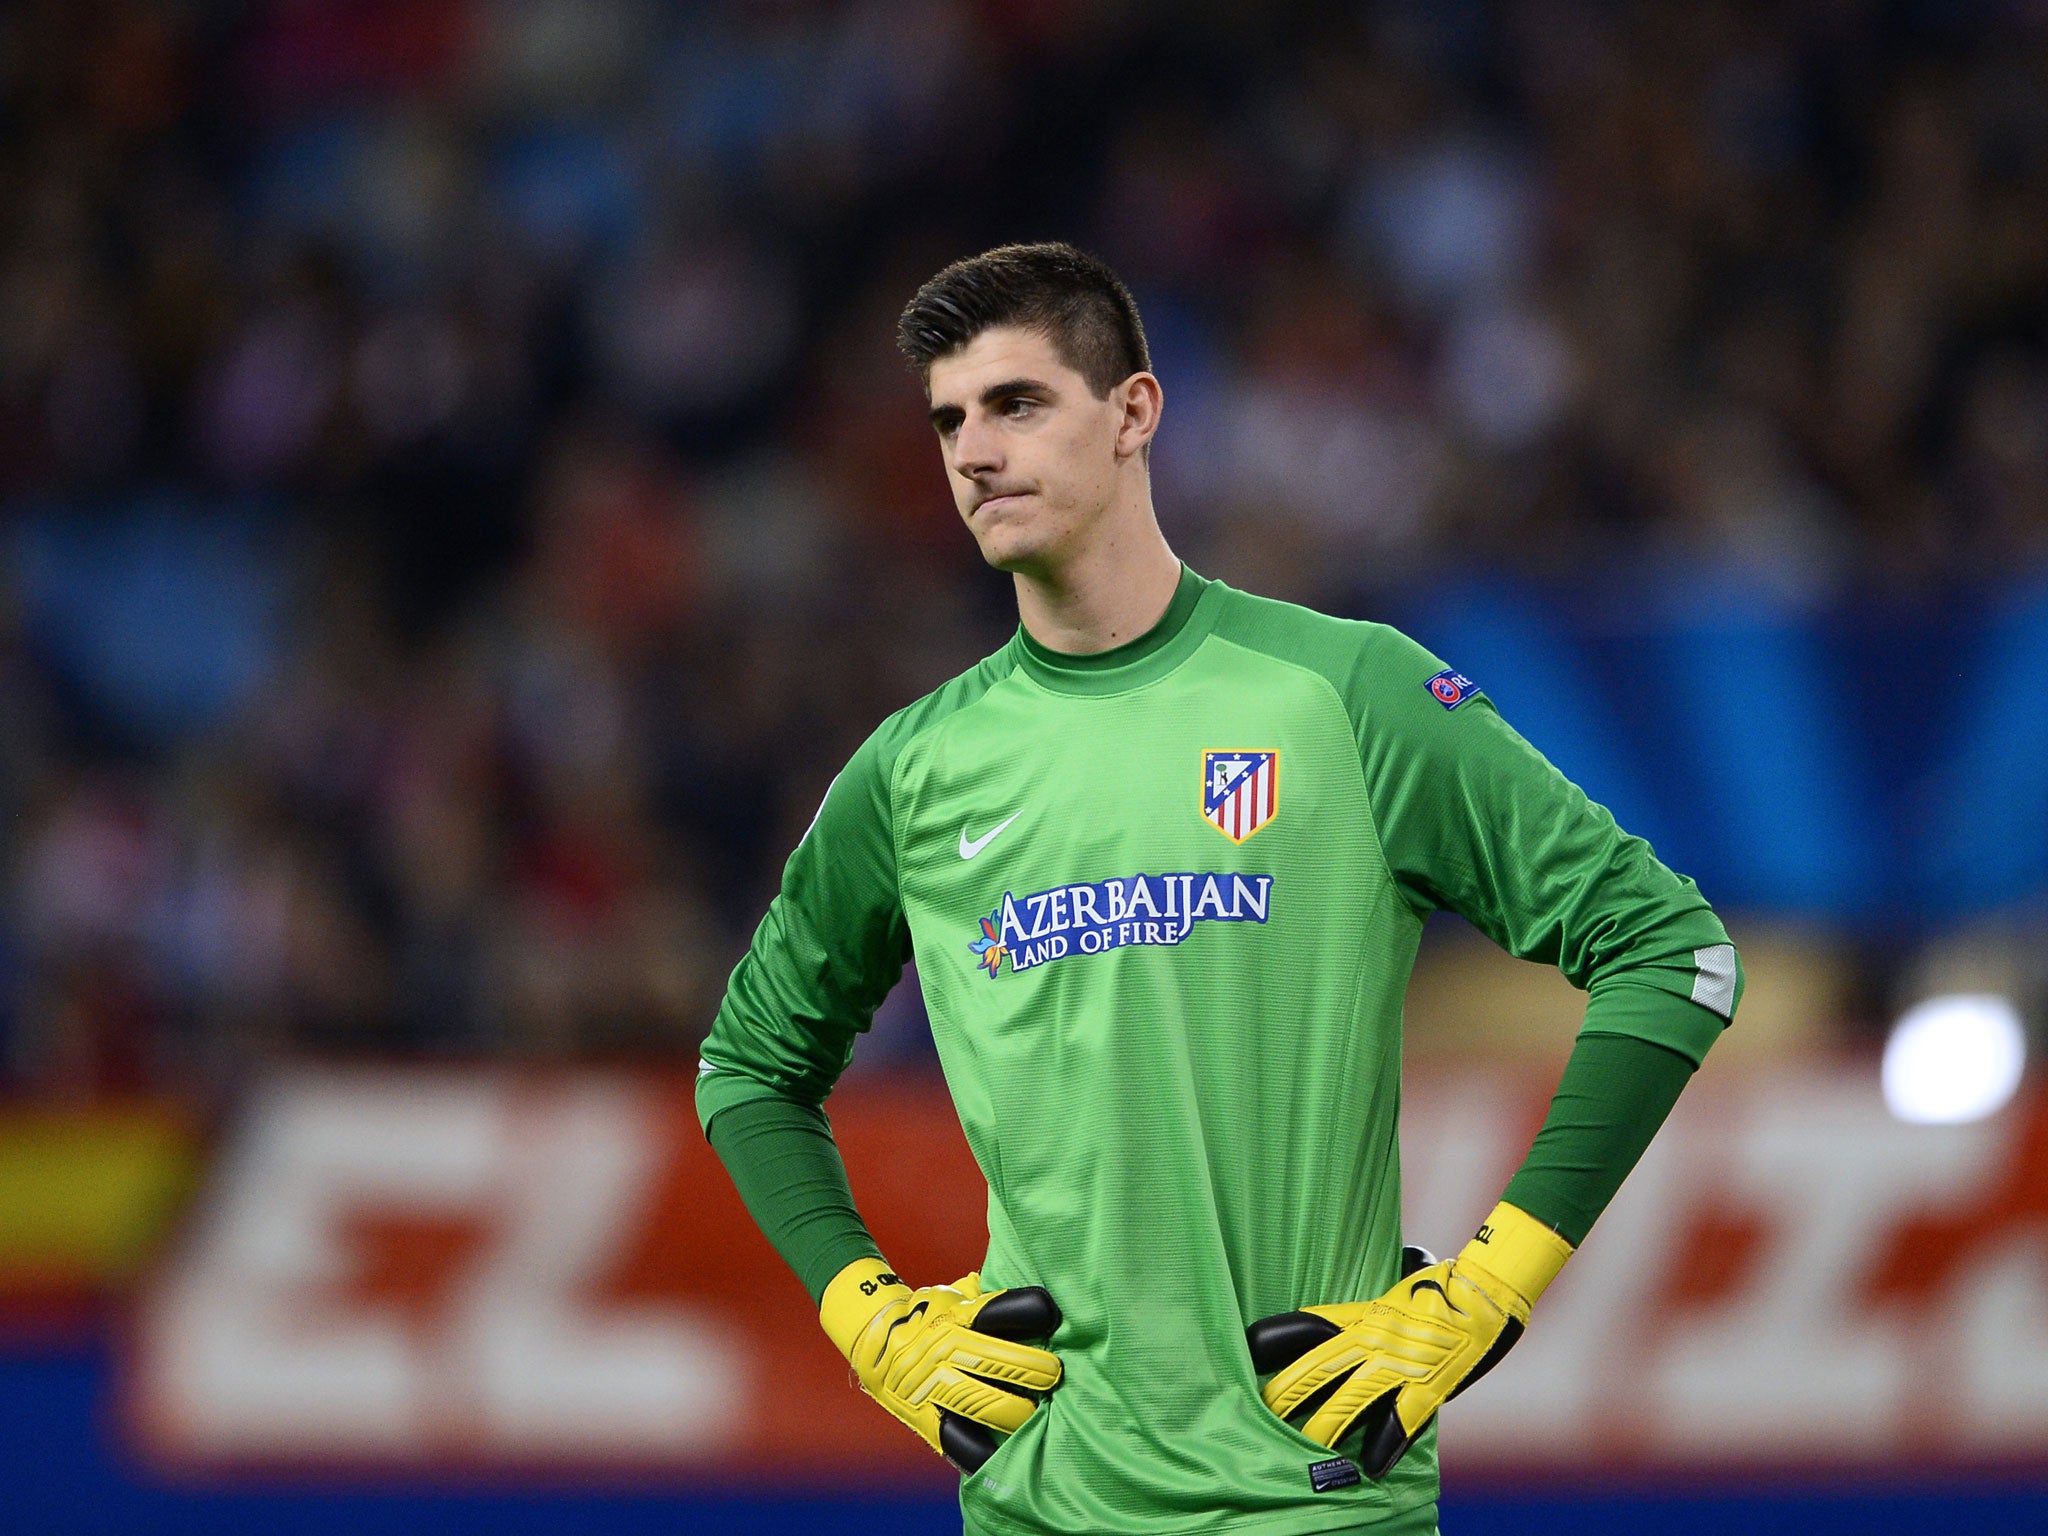 Chelsea's Belgian goalkeeper Thibaut Courtois has been loan at Atlectico Madrid since 2011